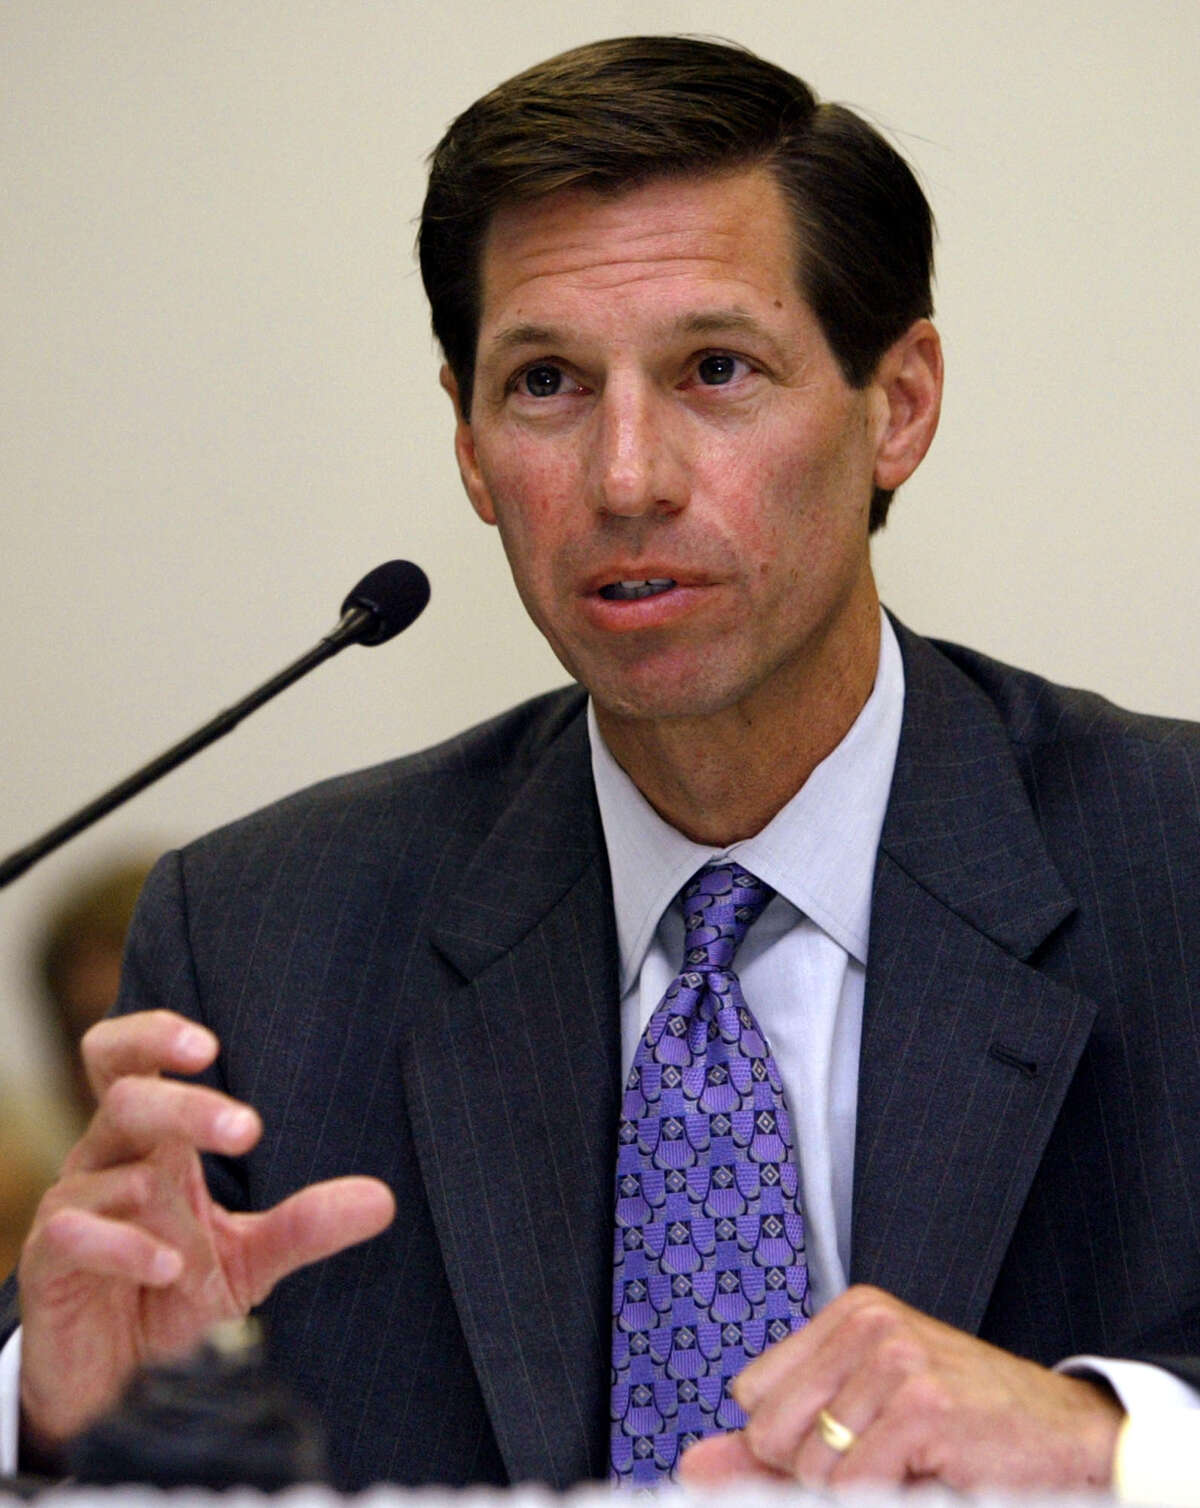 James P. Torgerson, president and CEO of Midwest ISO, briefs the Indiana Utility Regulatory Commission on its role in the blackout and its future plans during an informal hearing in Indianapolis, Monday, Aug. 25, 2003.